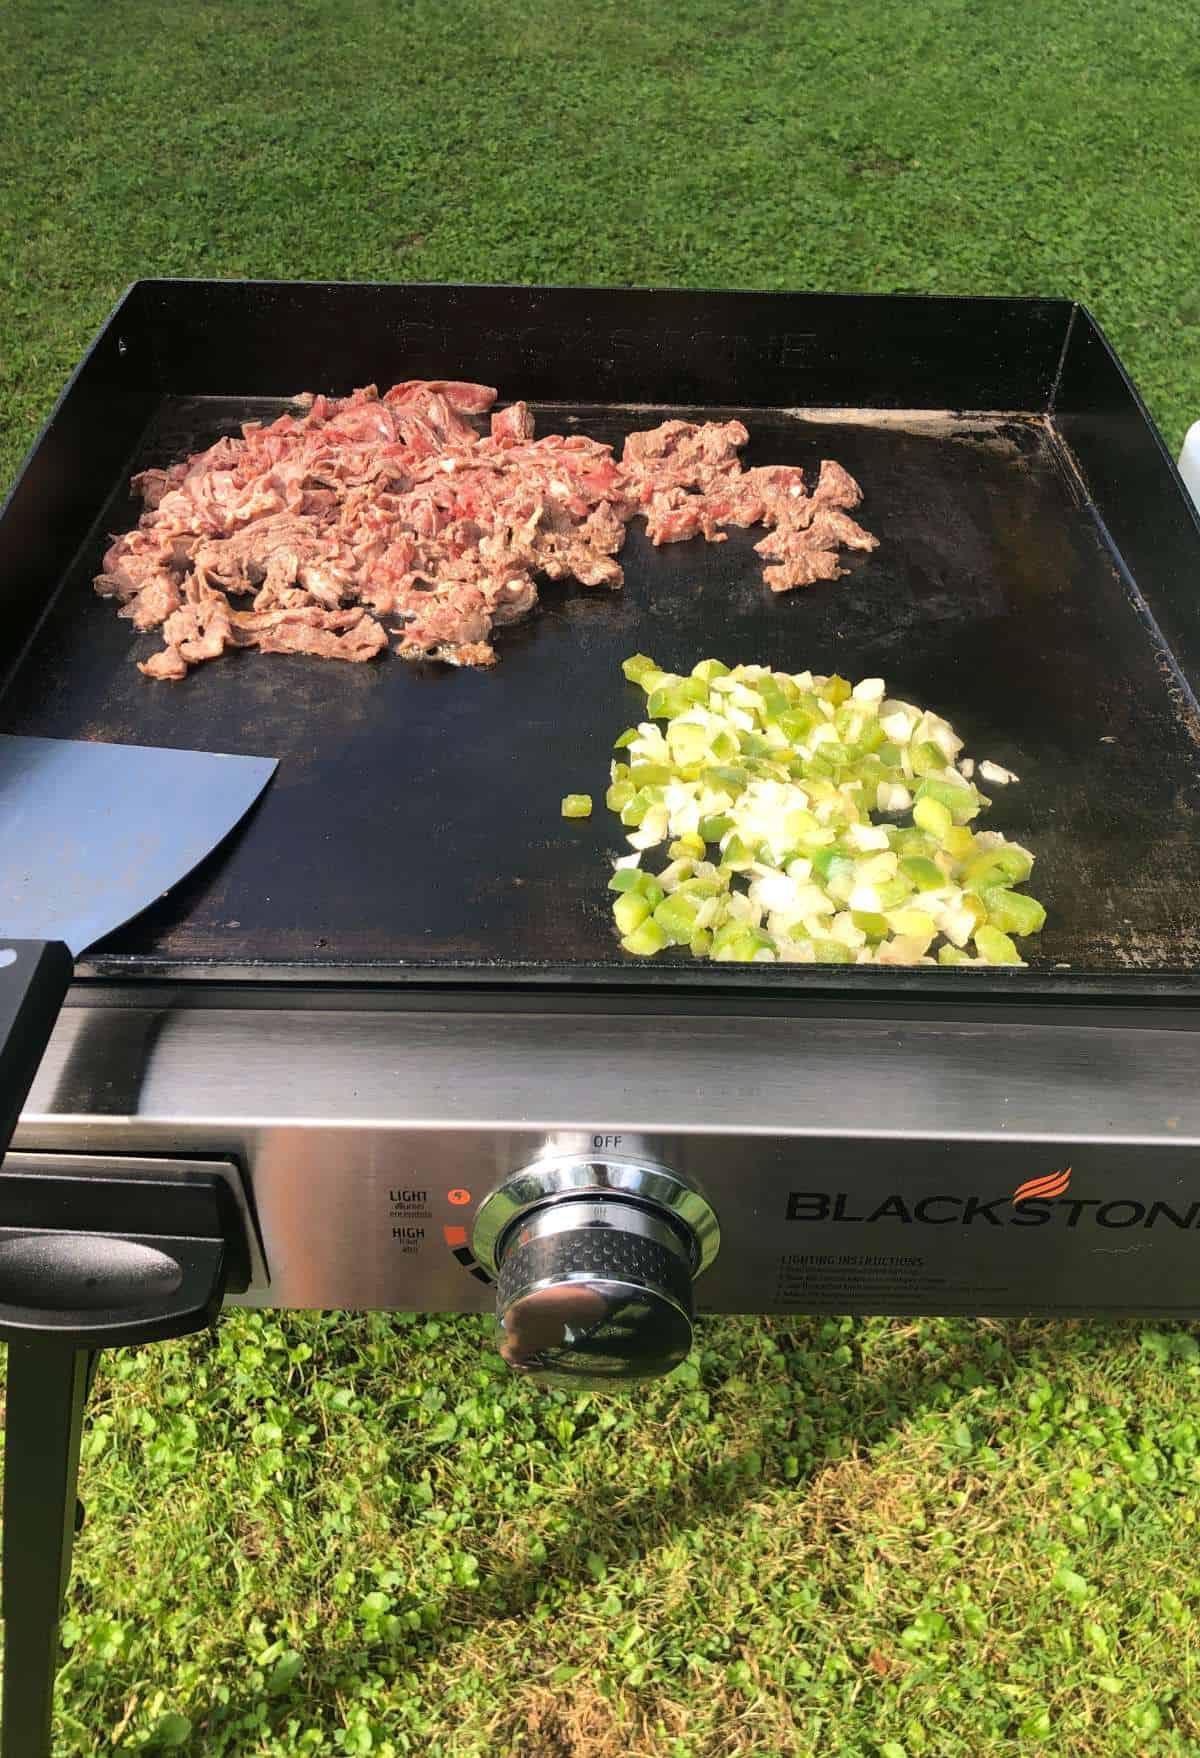 BLACKSTONE griddle for camping